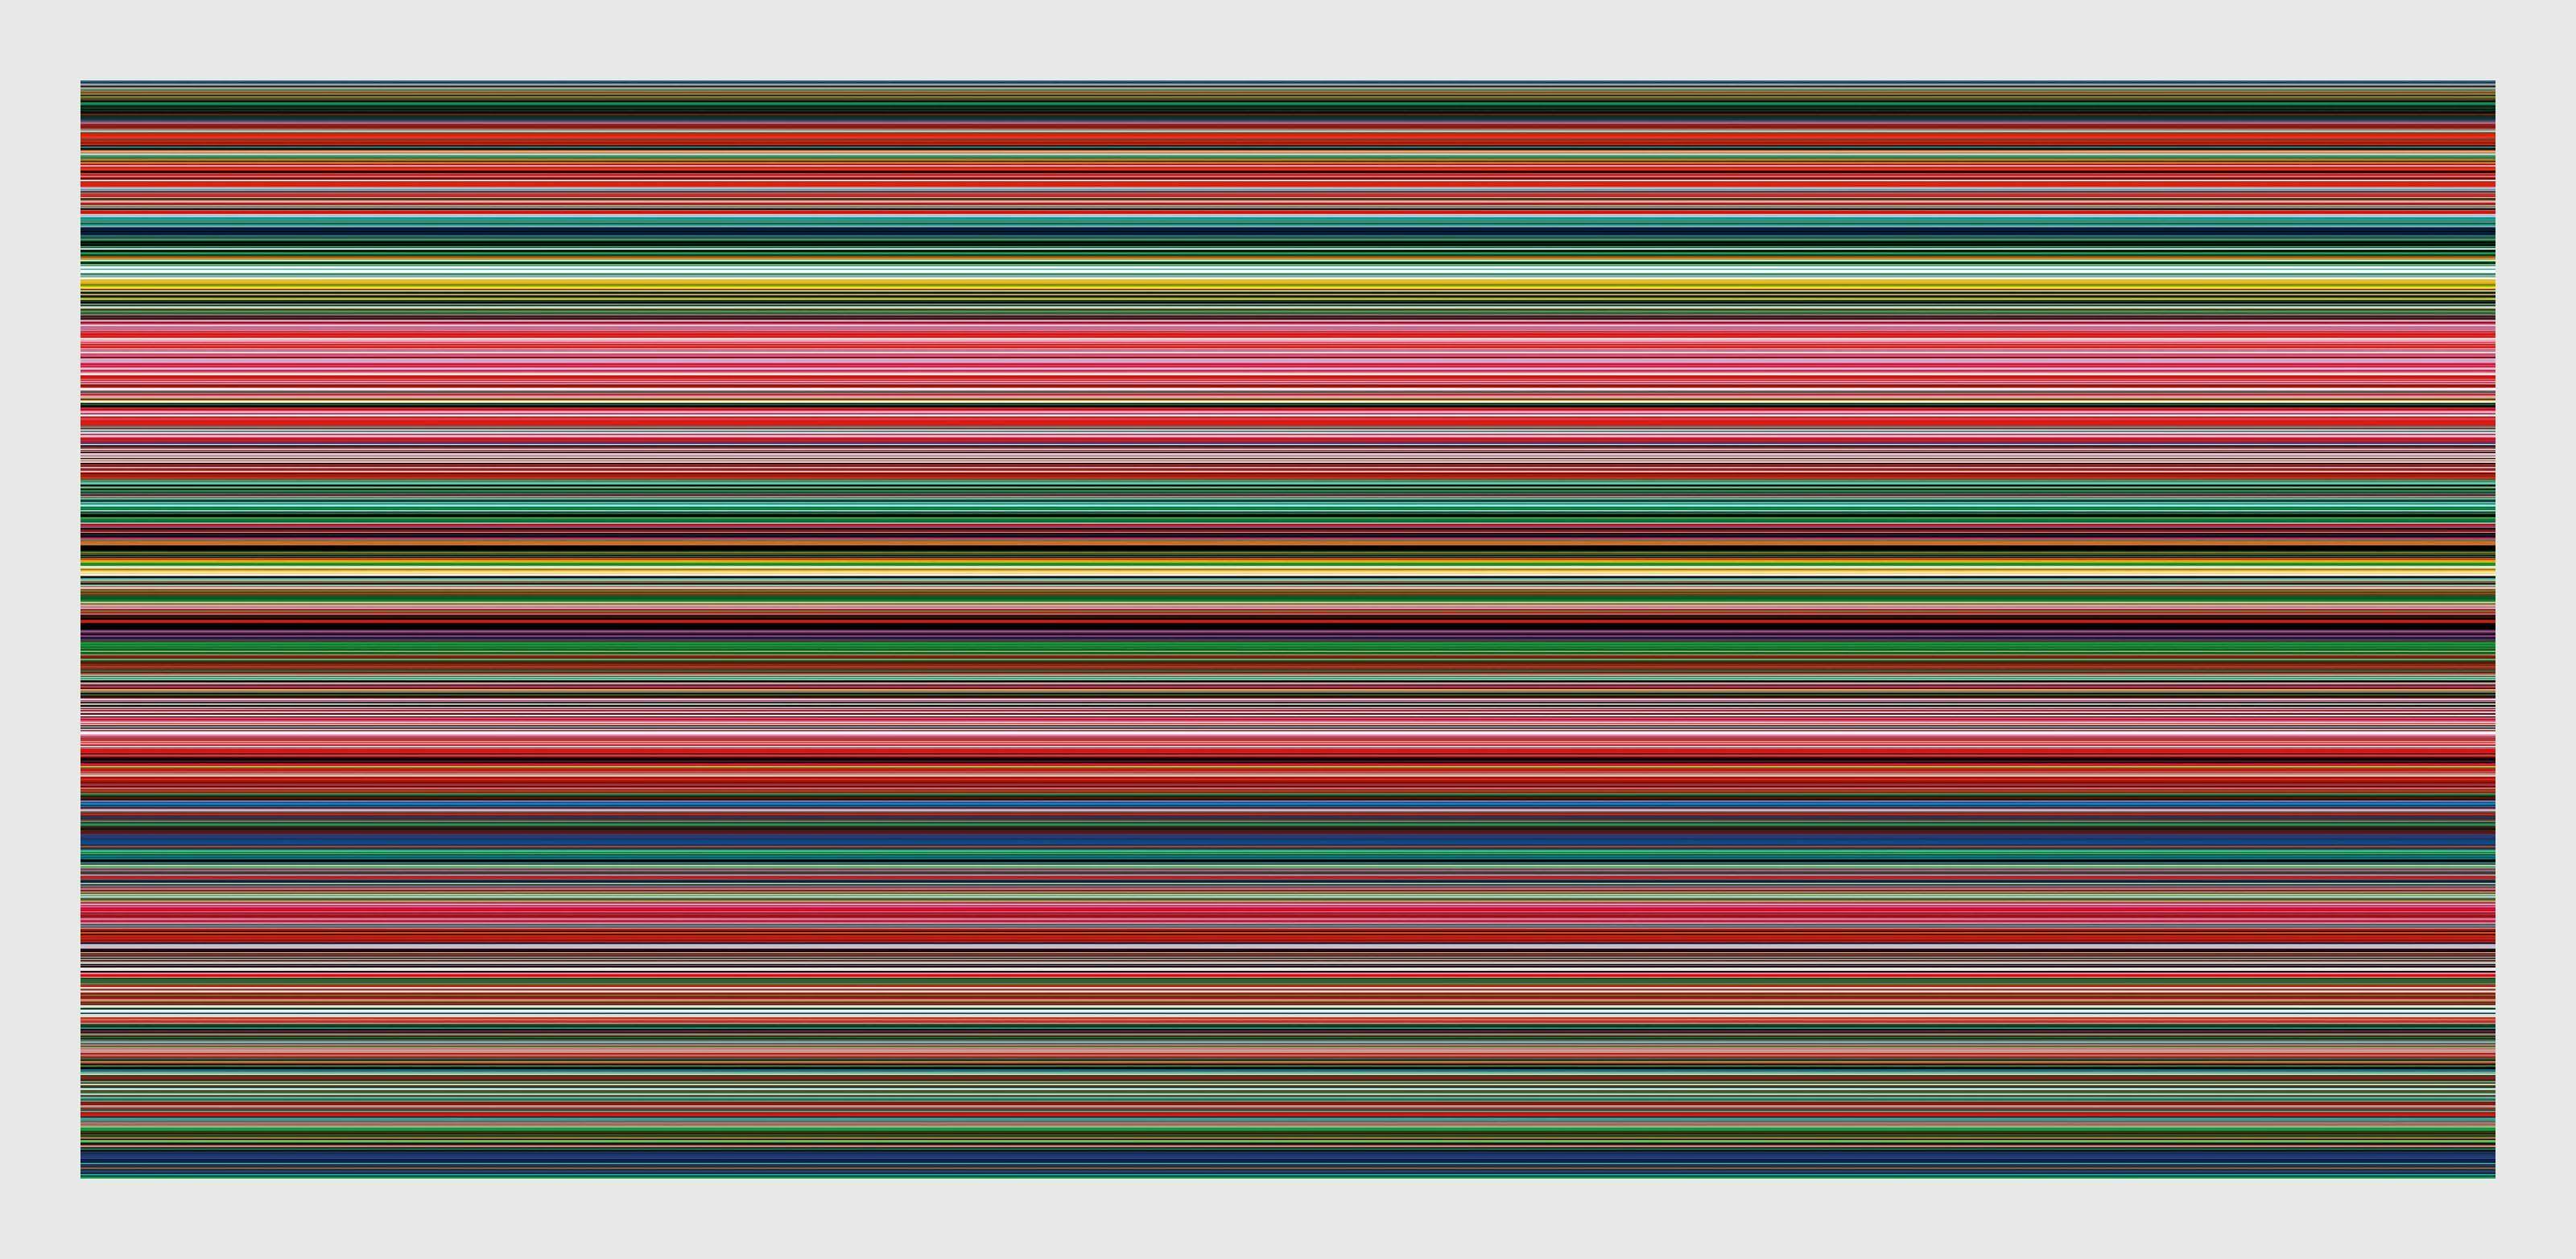 A painting by Gerhard Richter, titled Strip, dated 2011.